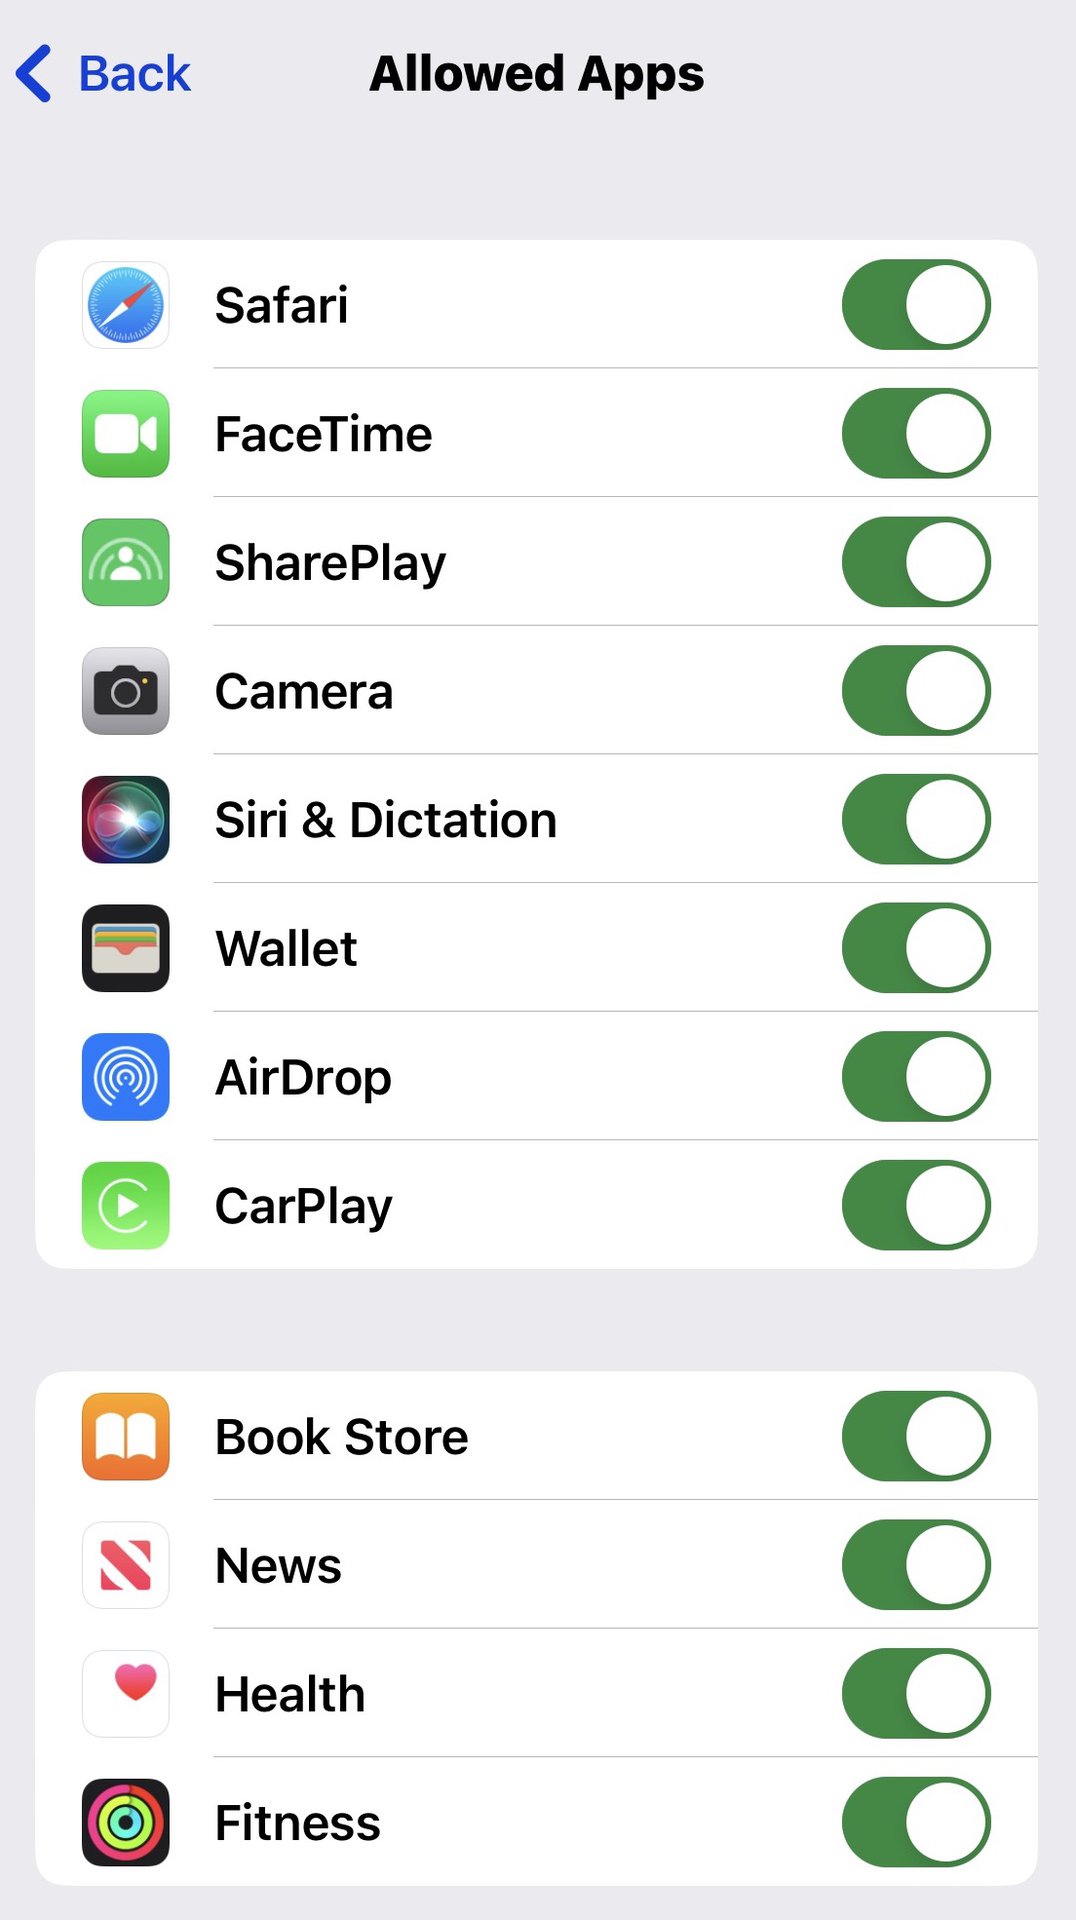 List of allowed iPhone apps apps